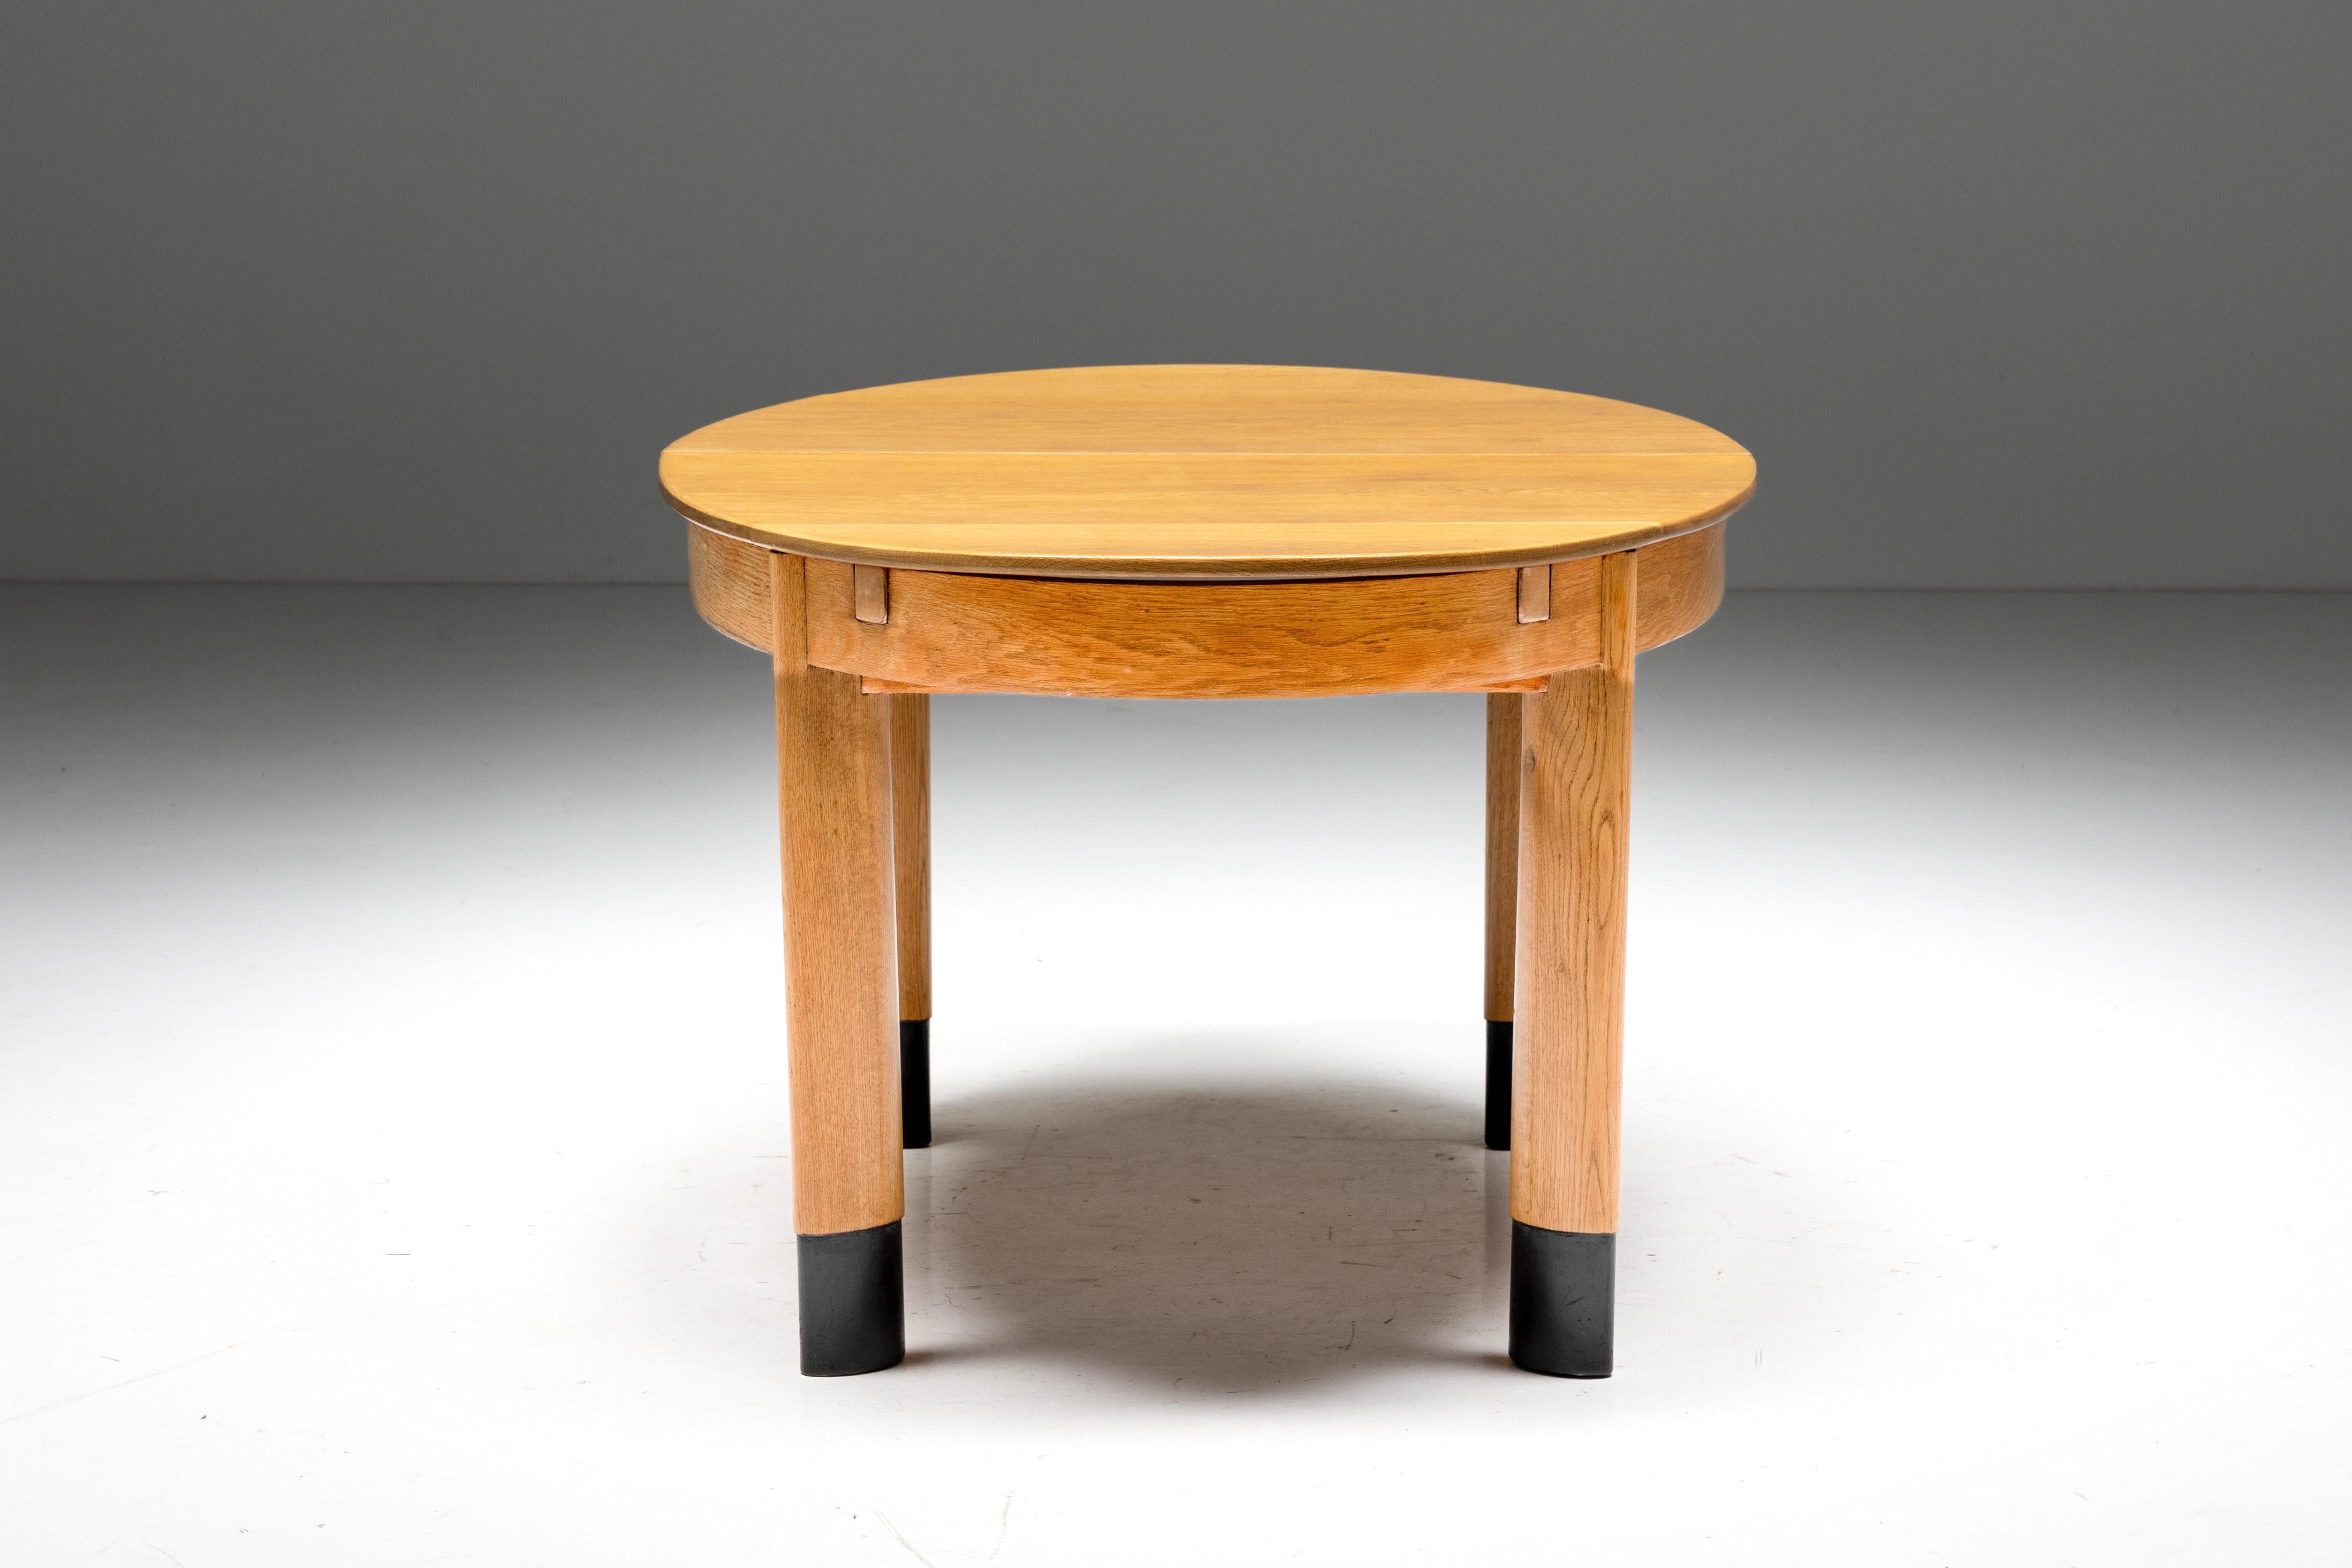 Modern Rationalist Oval Dining Table in Oak, Holland, 1920s For Sale